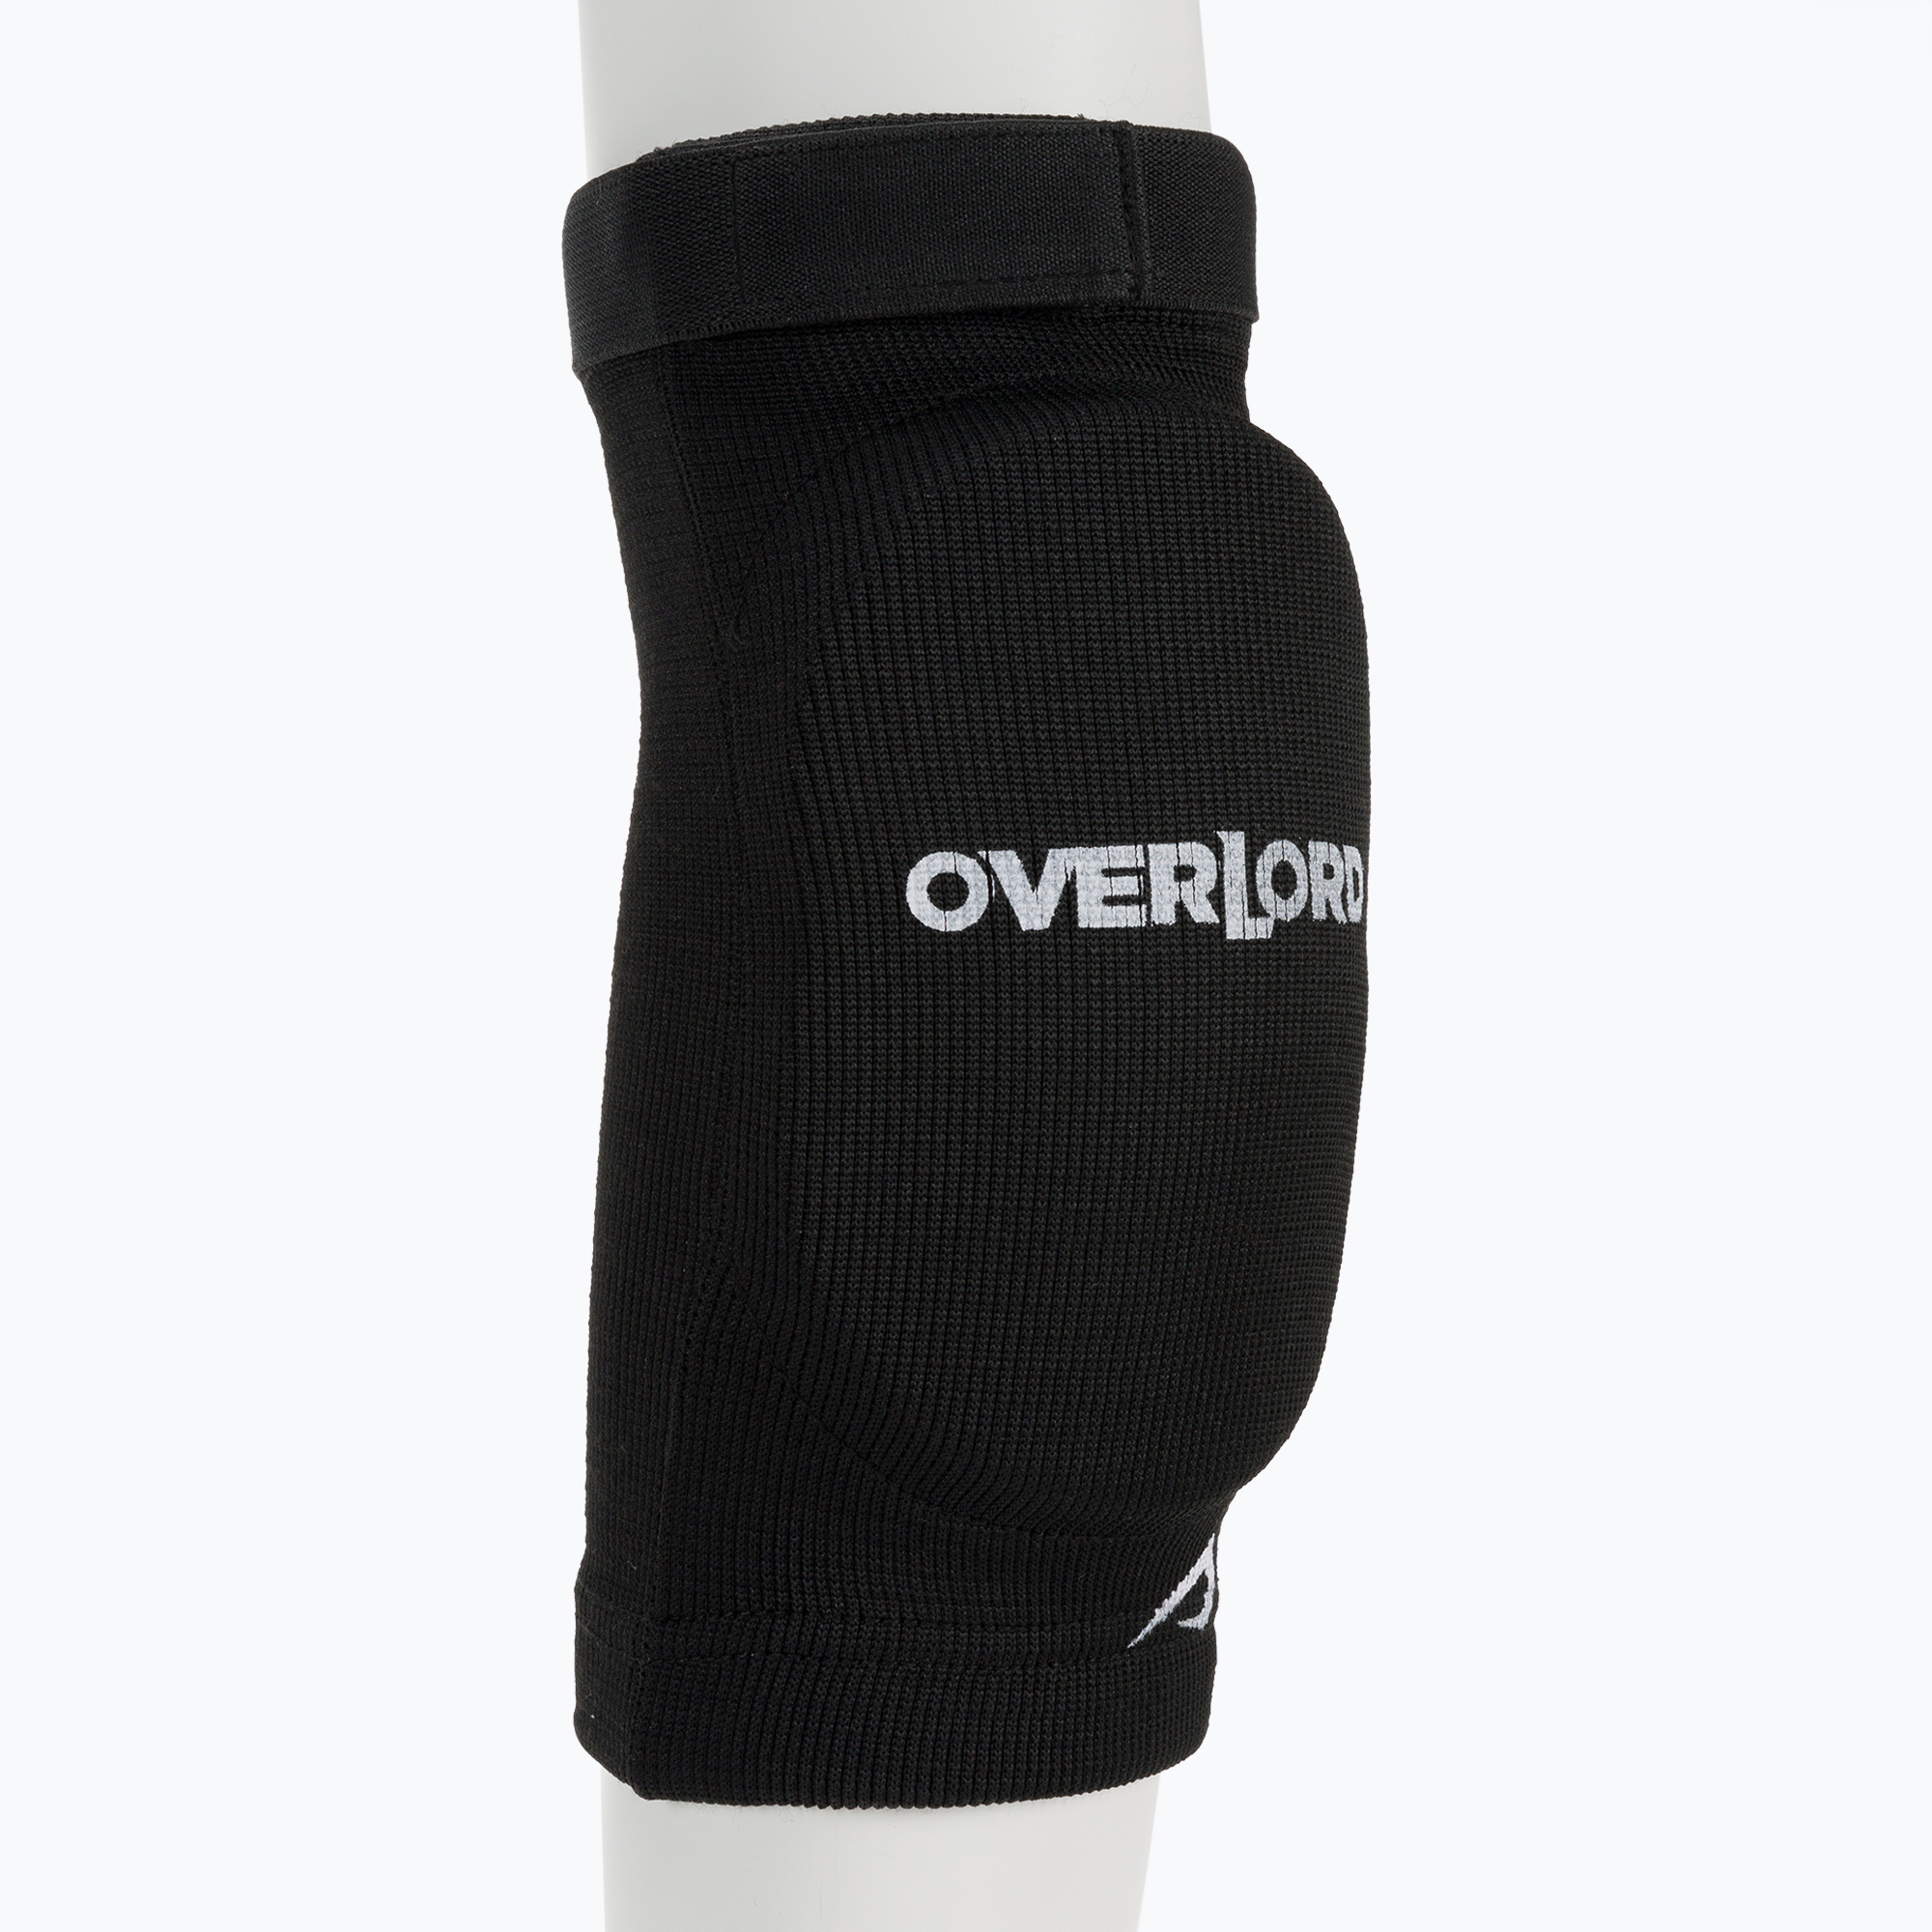 Cotiere Overlord negru 306002-BK/S